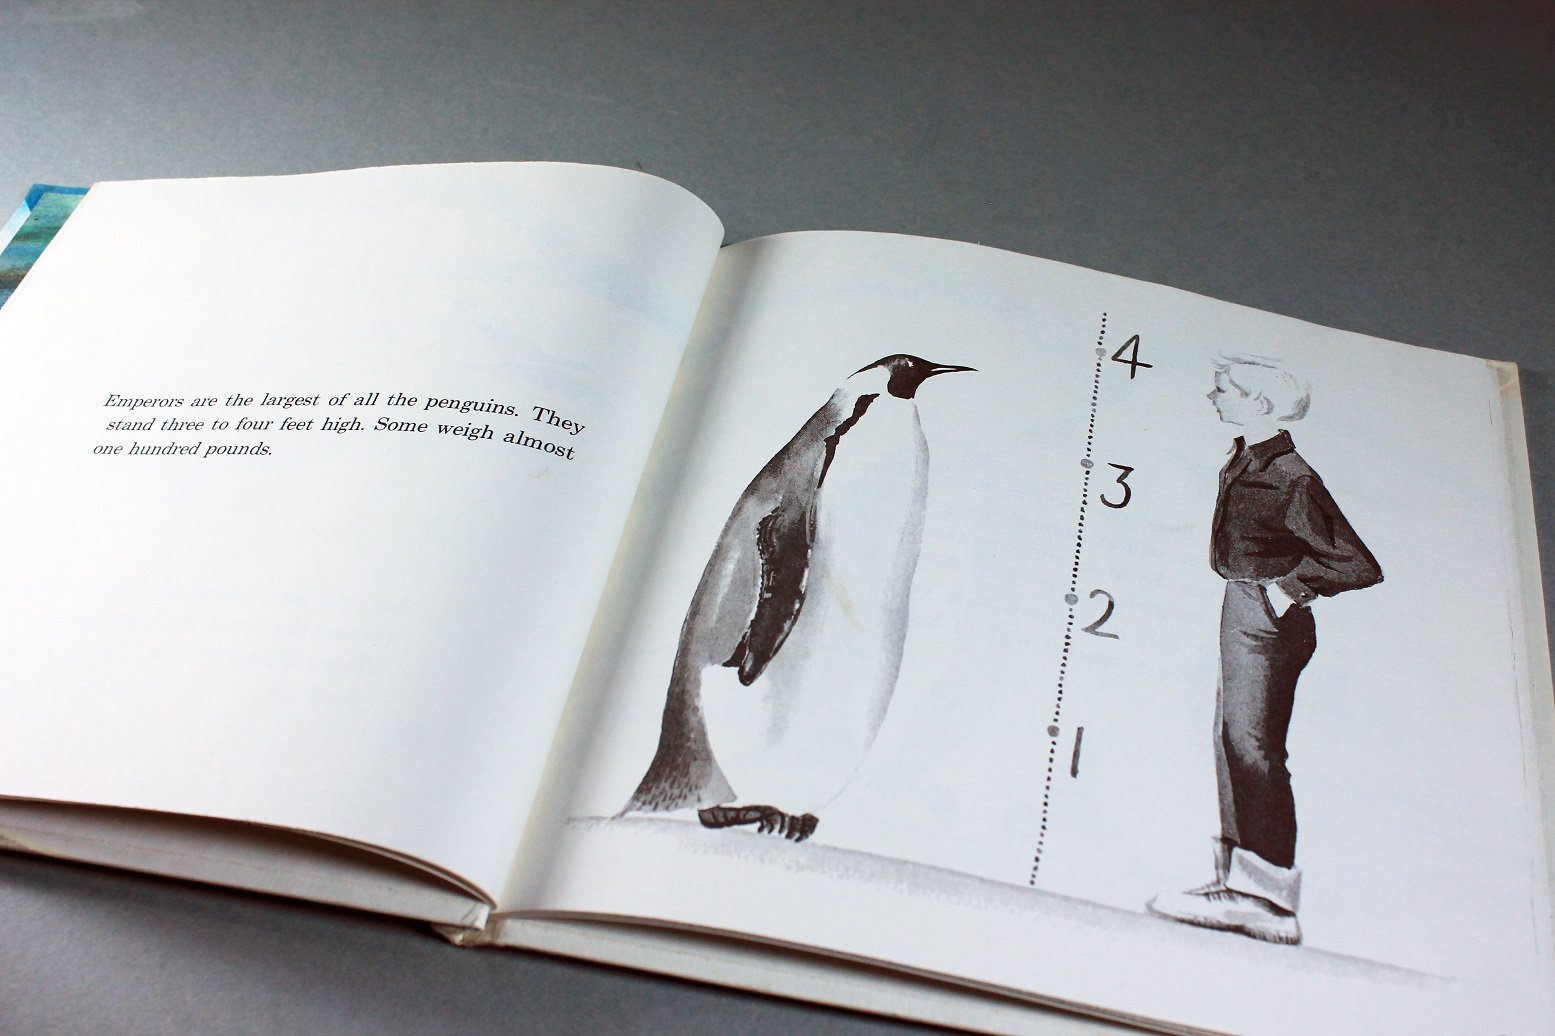 1969 Children's Hardcover Book, the Emperor Penguins, Kazue Mizumura,  Science, Non Fiction, Zoology, Ornithology, Illustrated, Collectable 